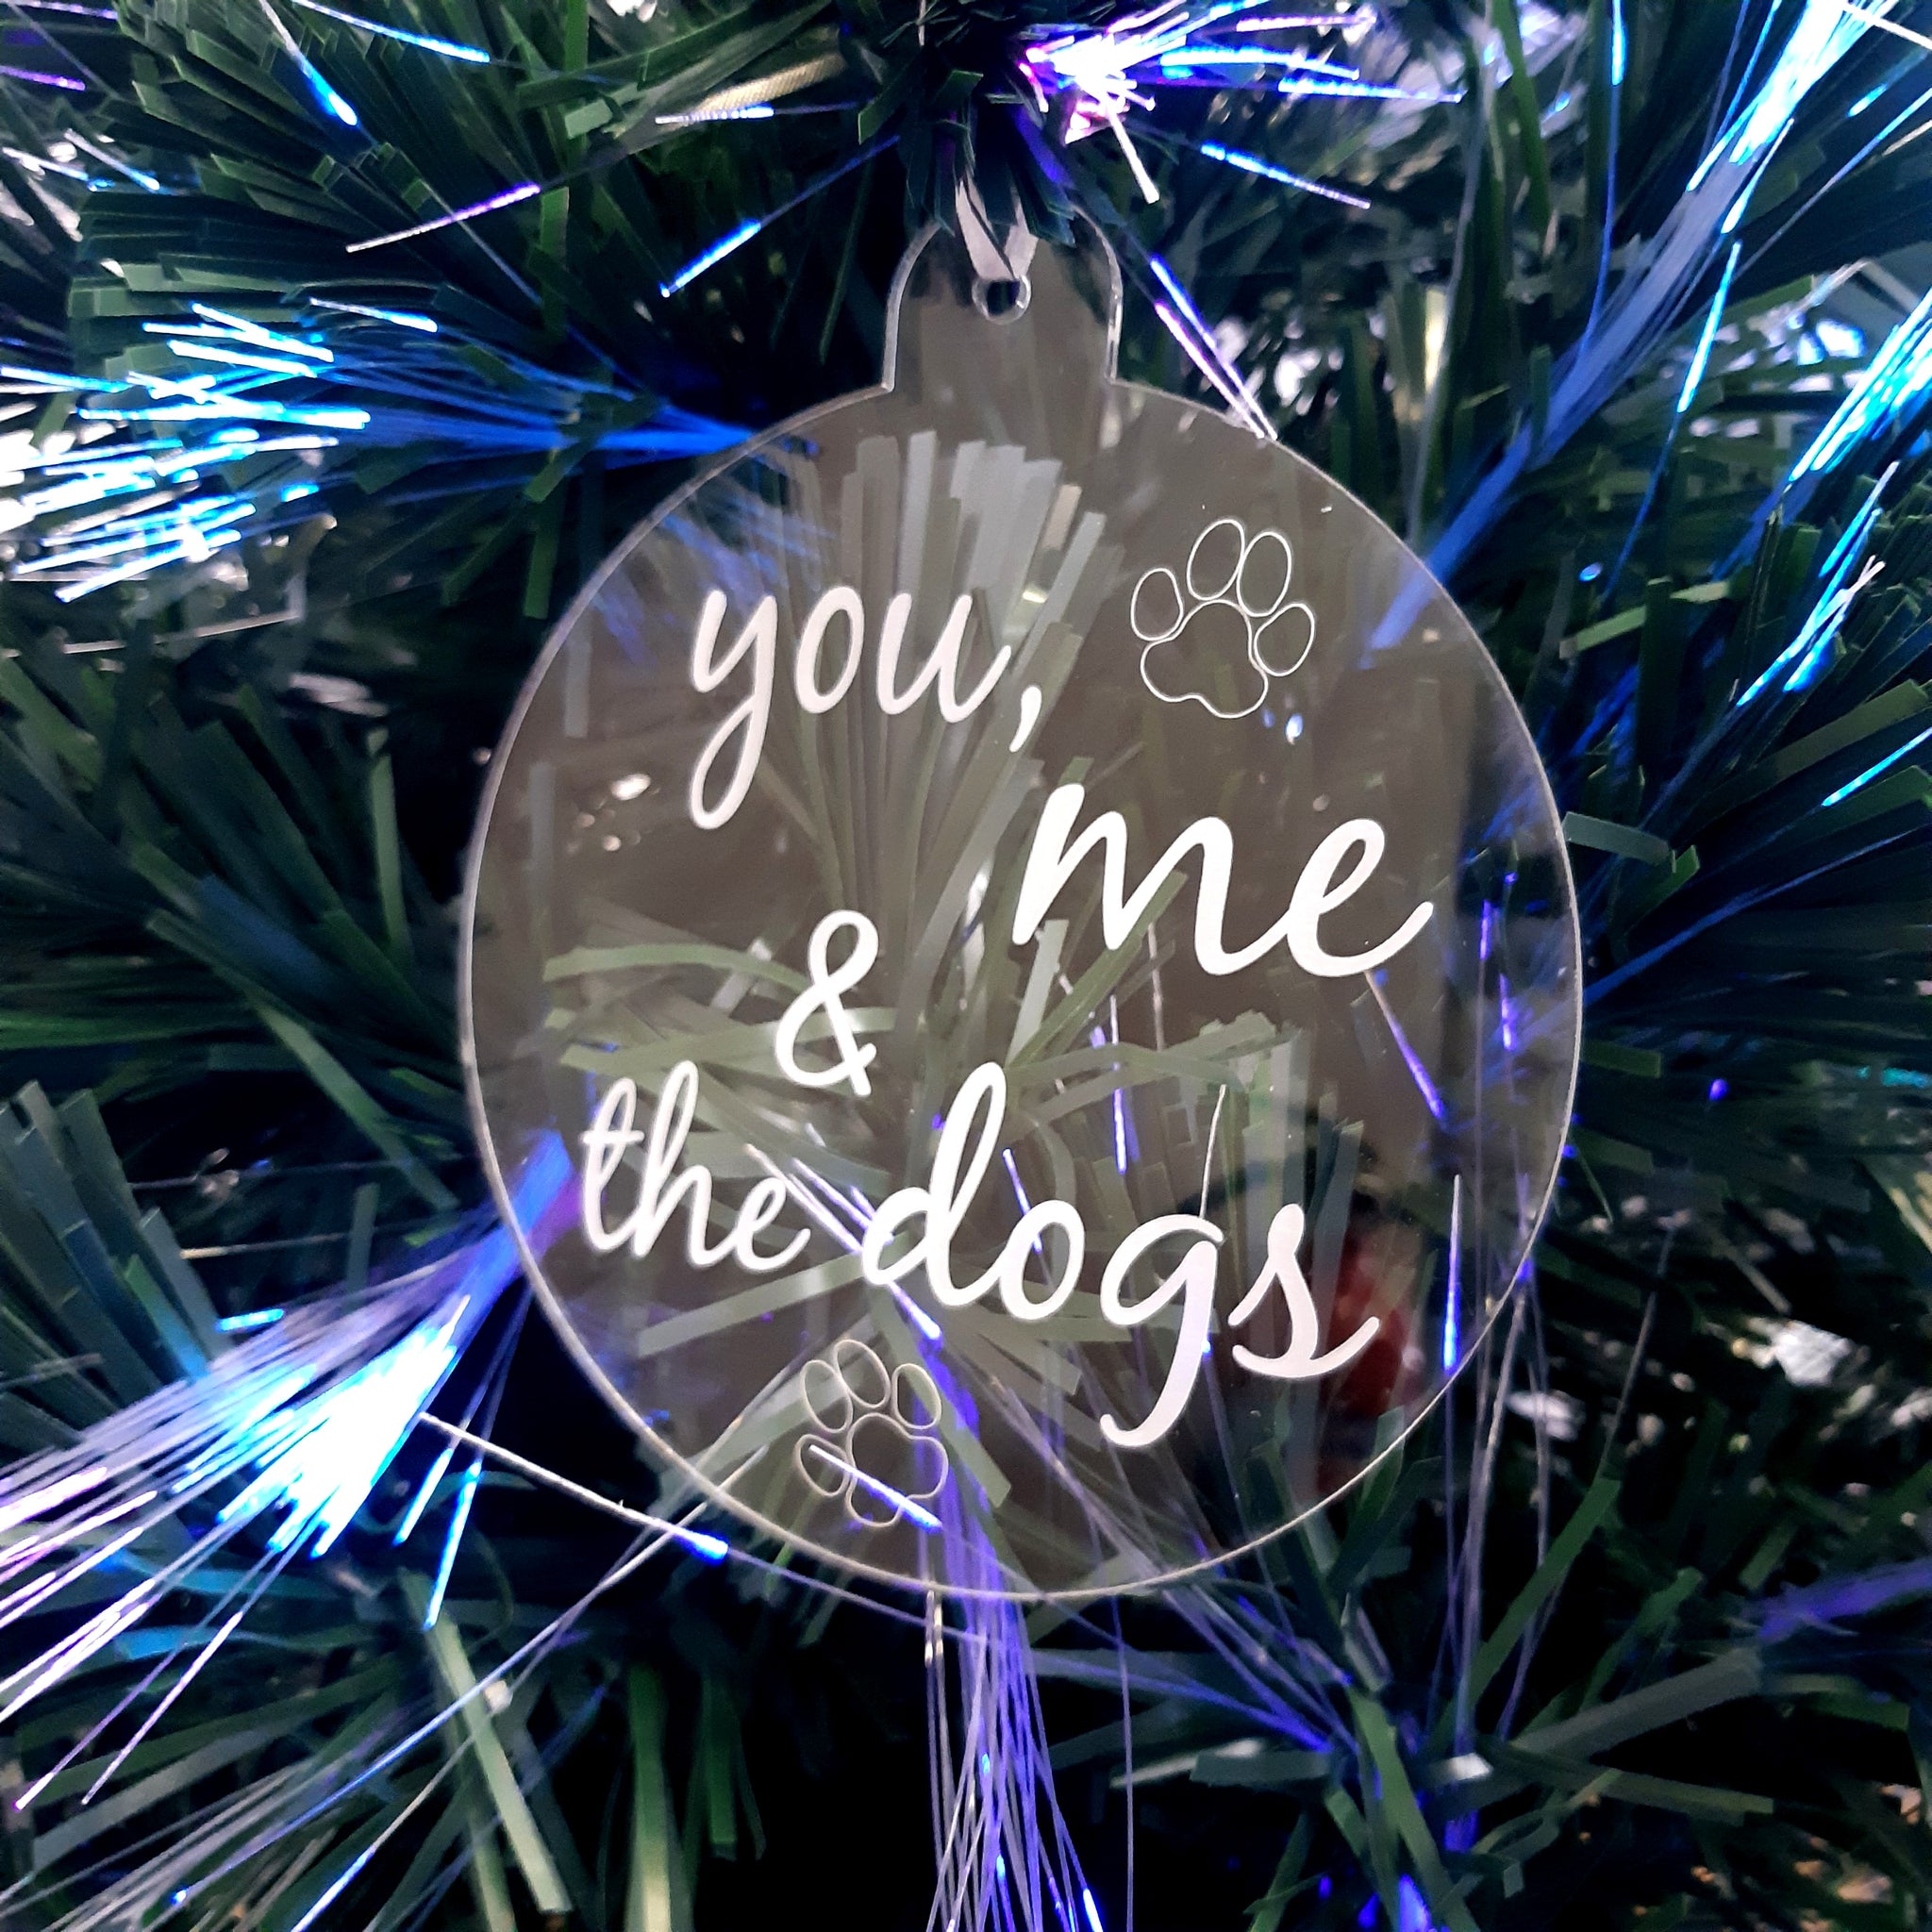 Bauble "You, Me & The Dogs" Engraved Christmas Tree Decorations, Clear